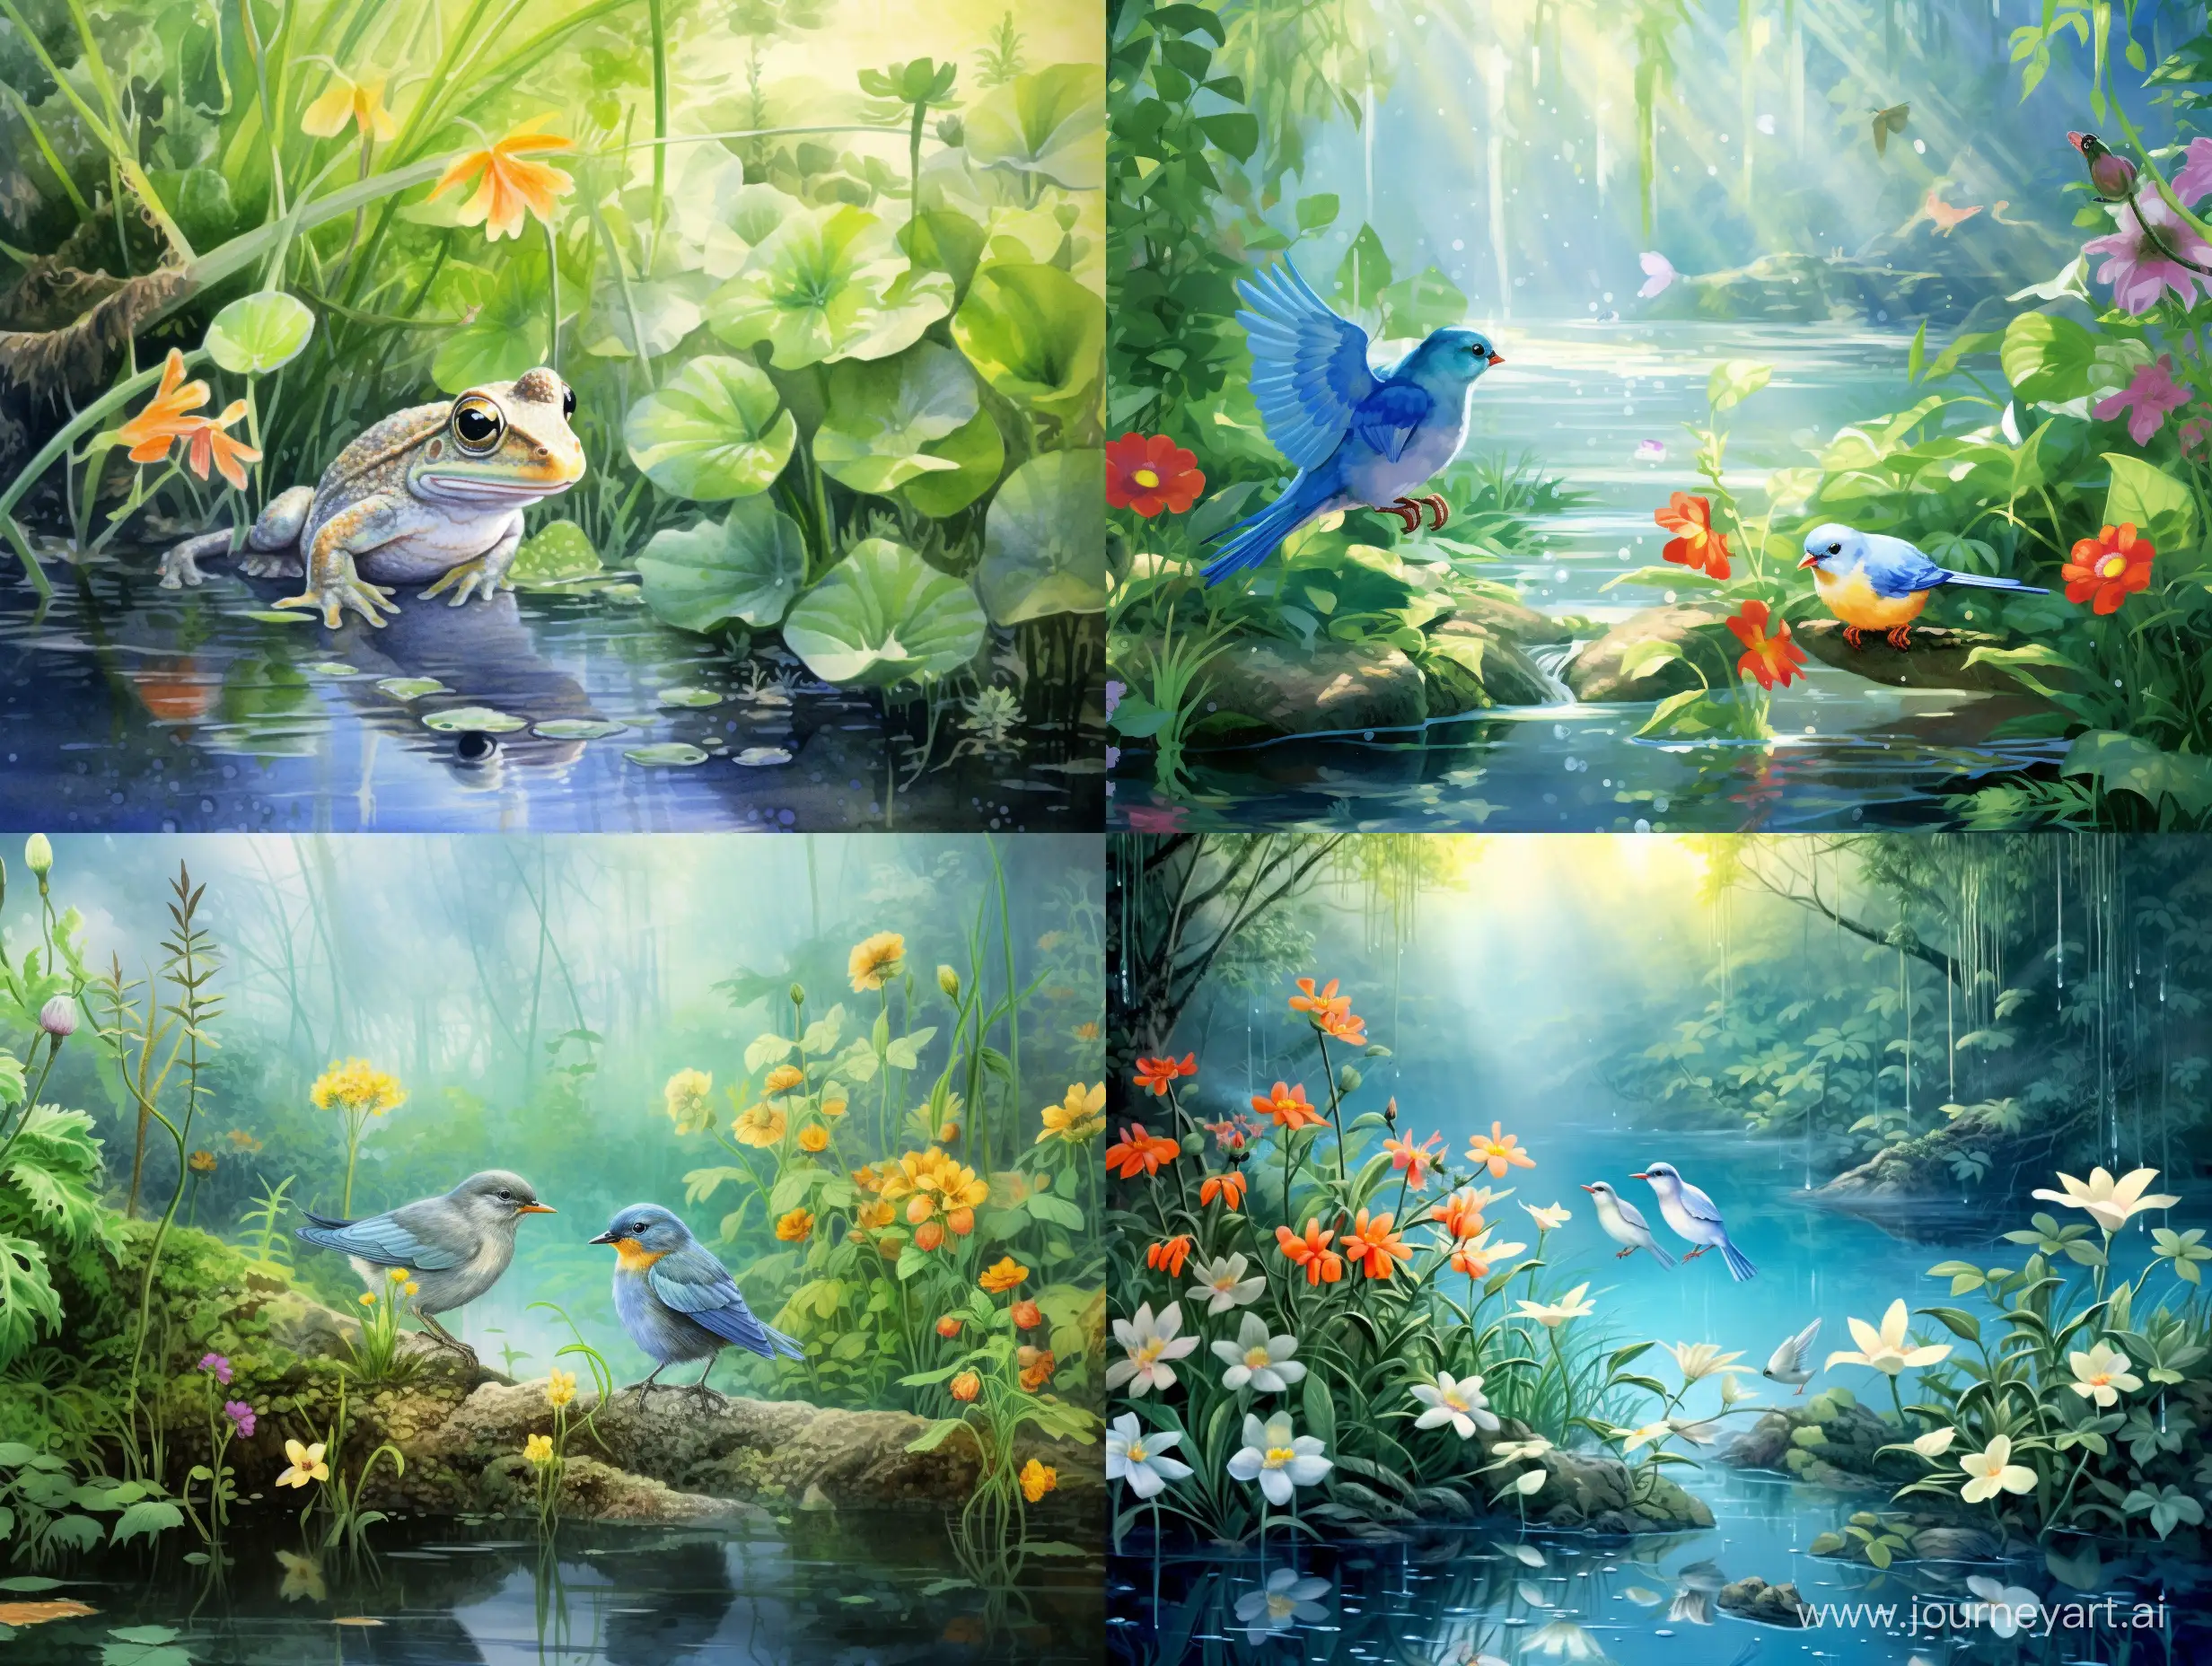 Enchanting-Watercolor-Scene-Delicate-Birds-in-Sunlit-Puddle-Amidst-Lush-Greenery